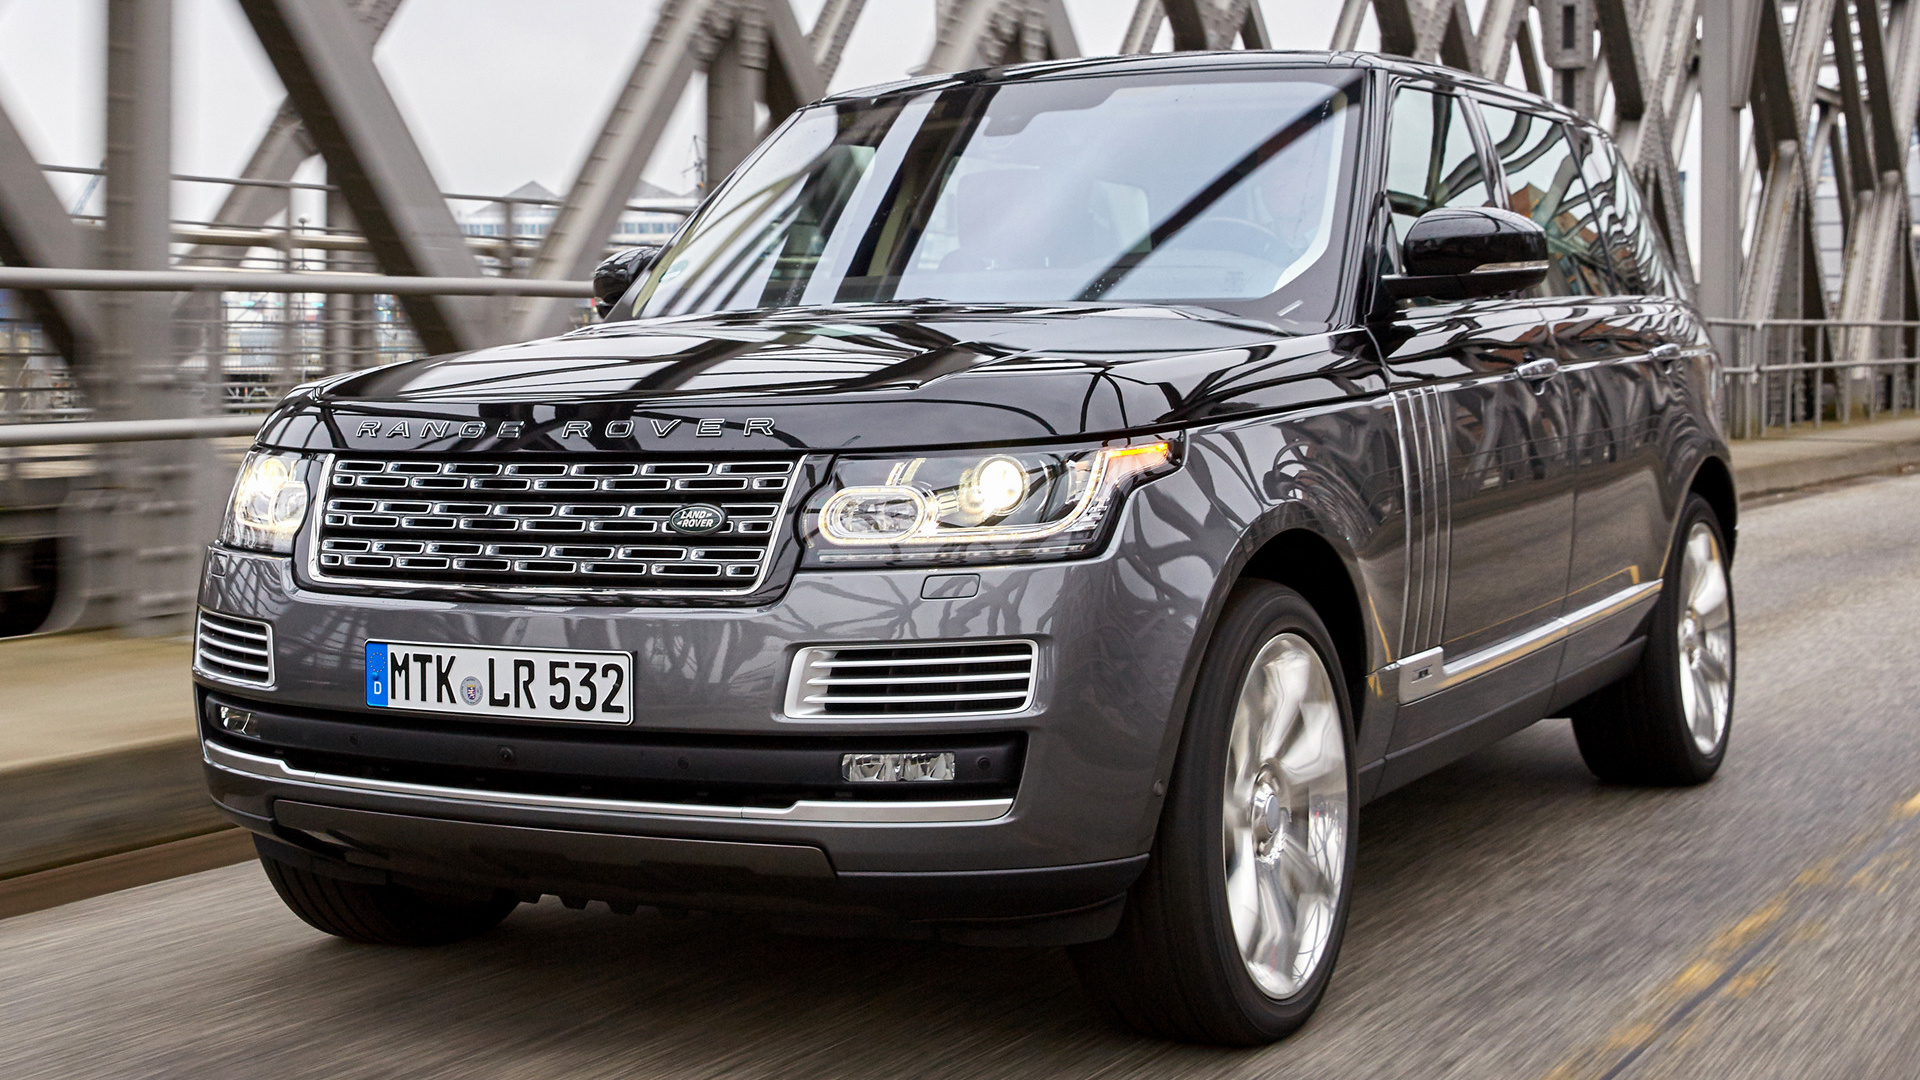 2015 Range Rover SVAutobiography [LWB] - Wallpapers and HD Images | Car ...